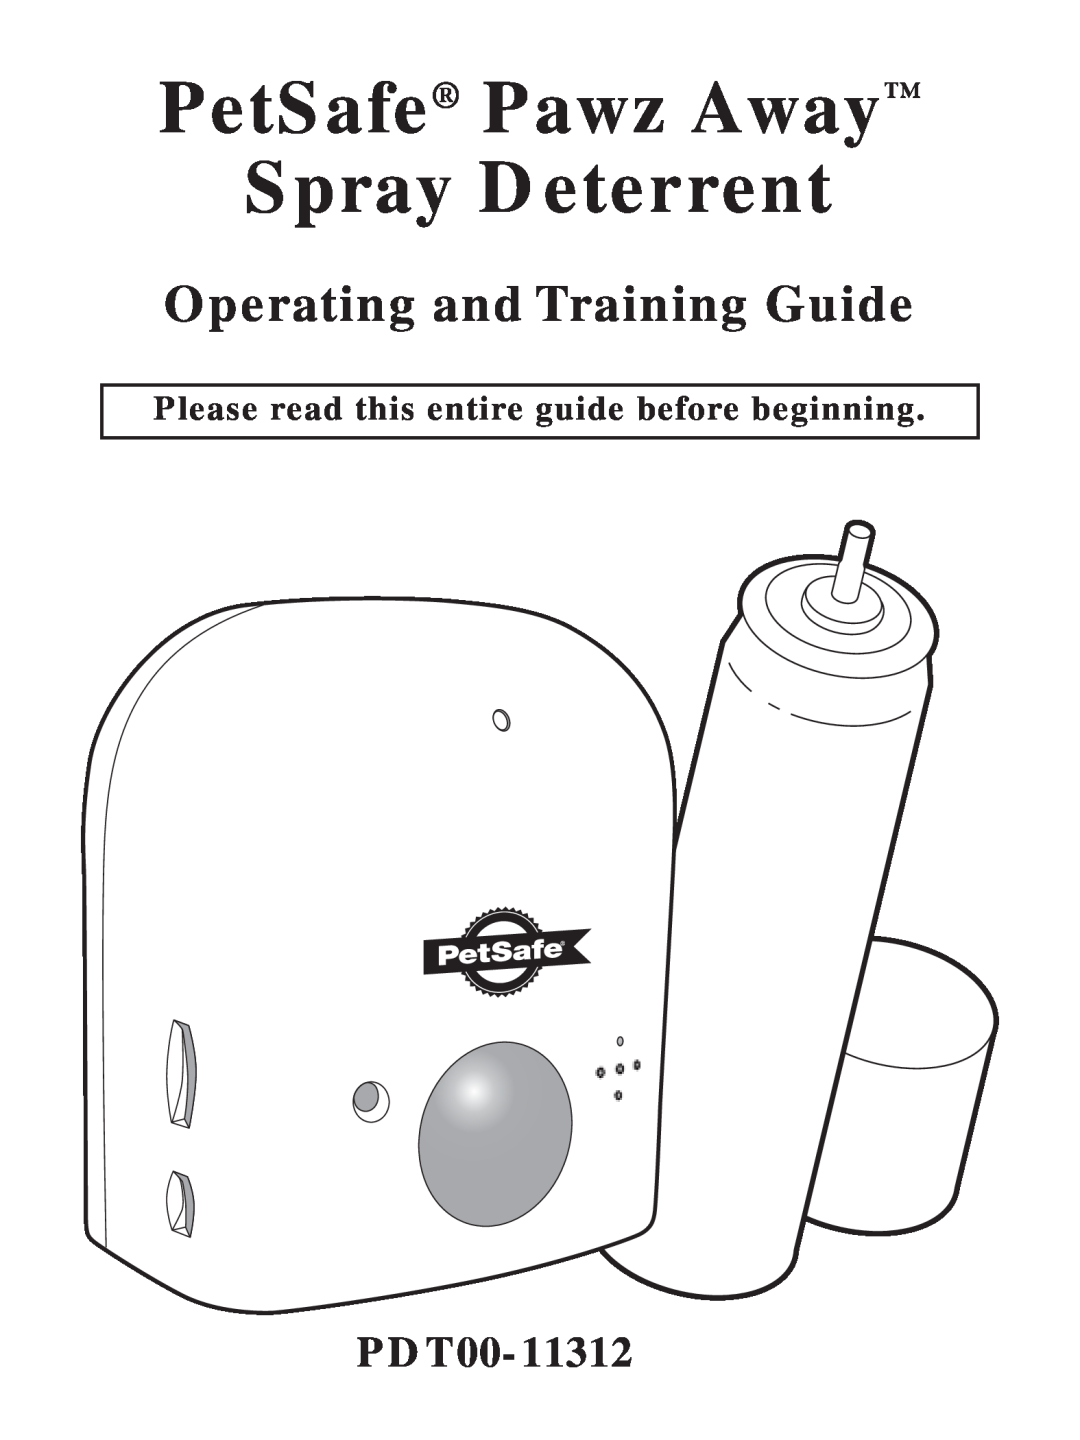 Petsafe PDT00-11312 manual Please read this entire guide before beginning, PetSafe Pawz Away Spray Deterrent 